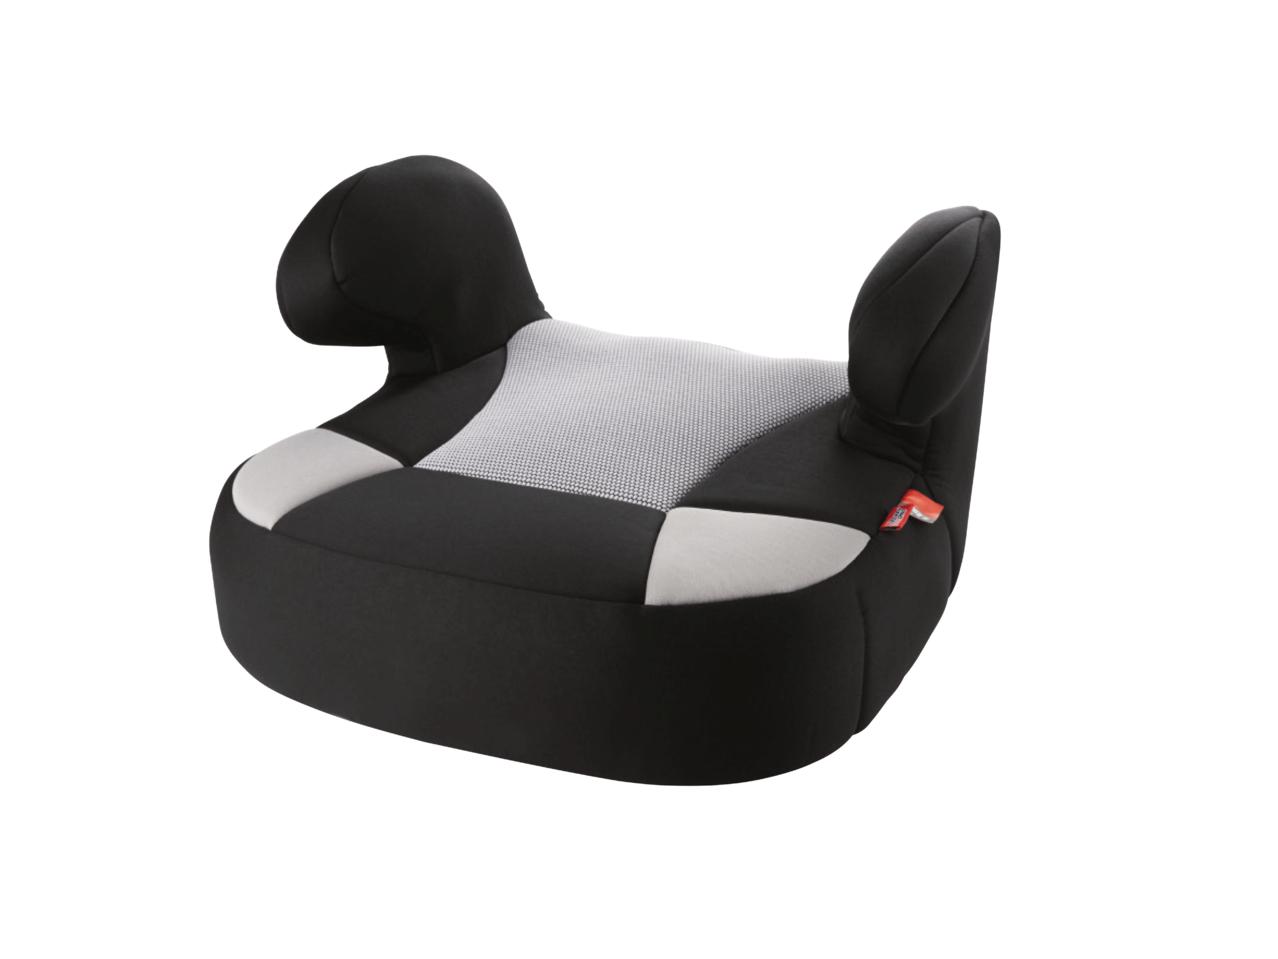 ULTIMATE SPEED(R) Kids' Booster Seat